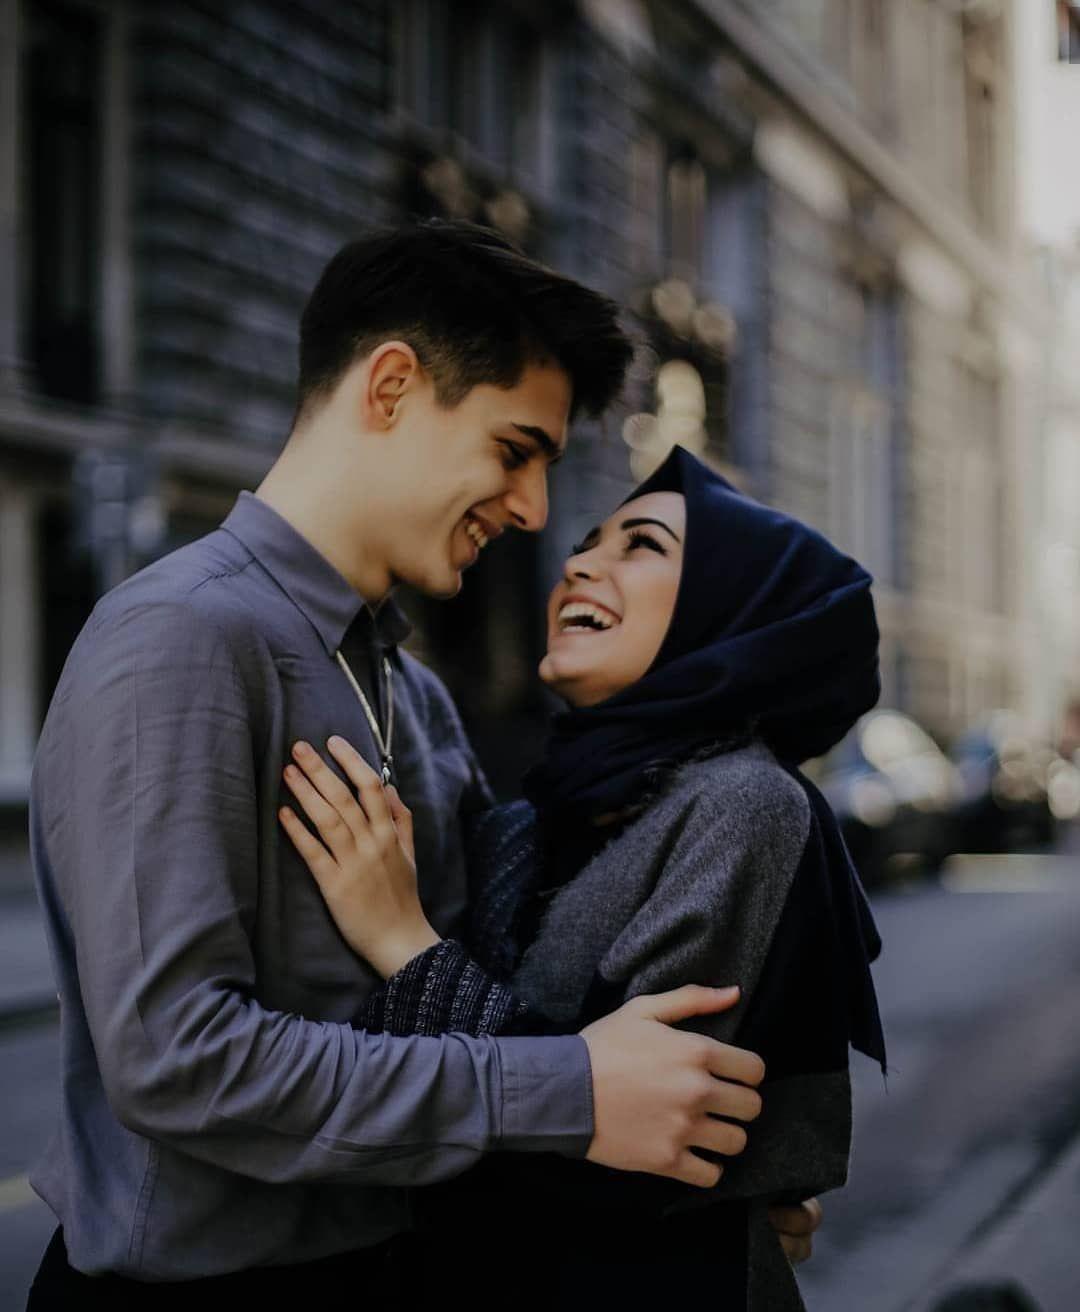 Muslim Couple Wallpapers - Top Free Muslim Couple Backgrounds ...